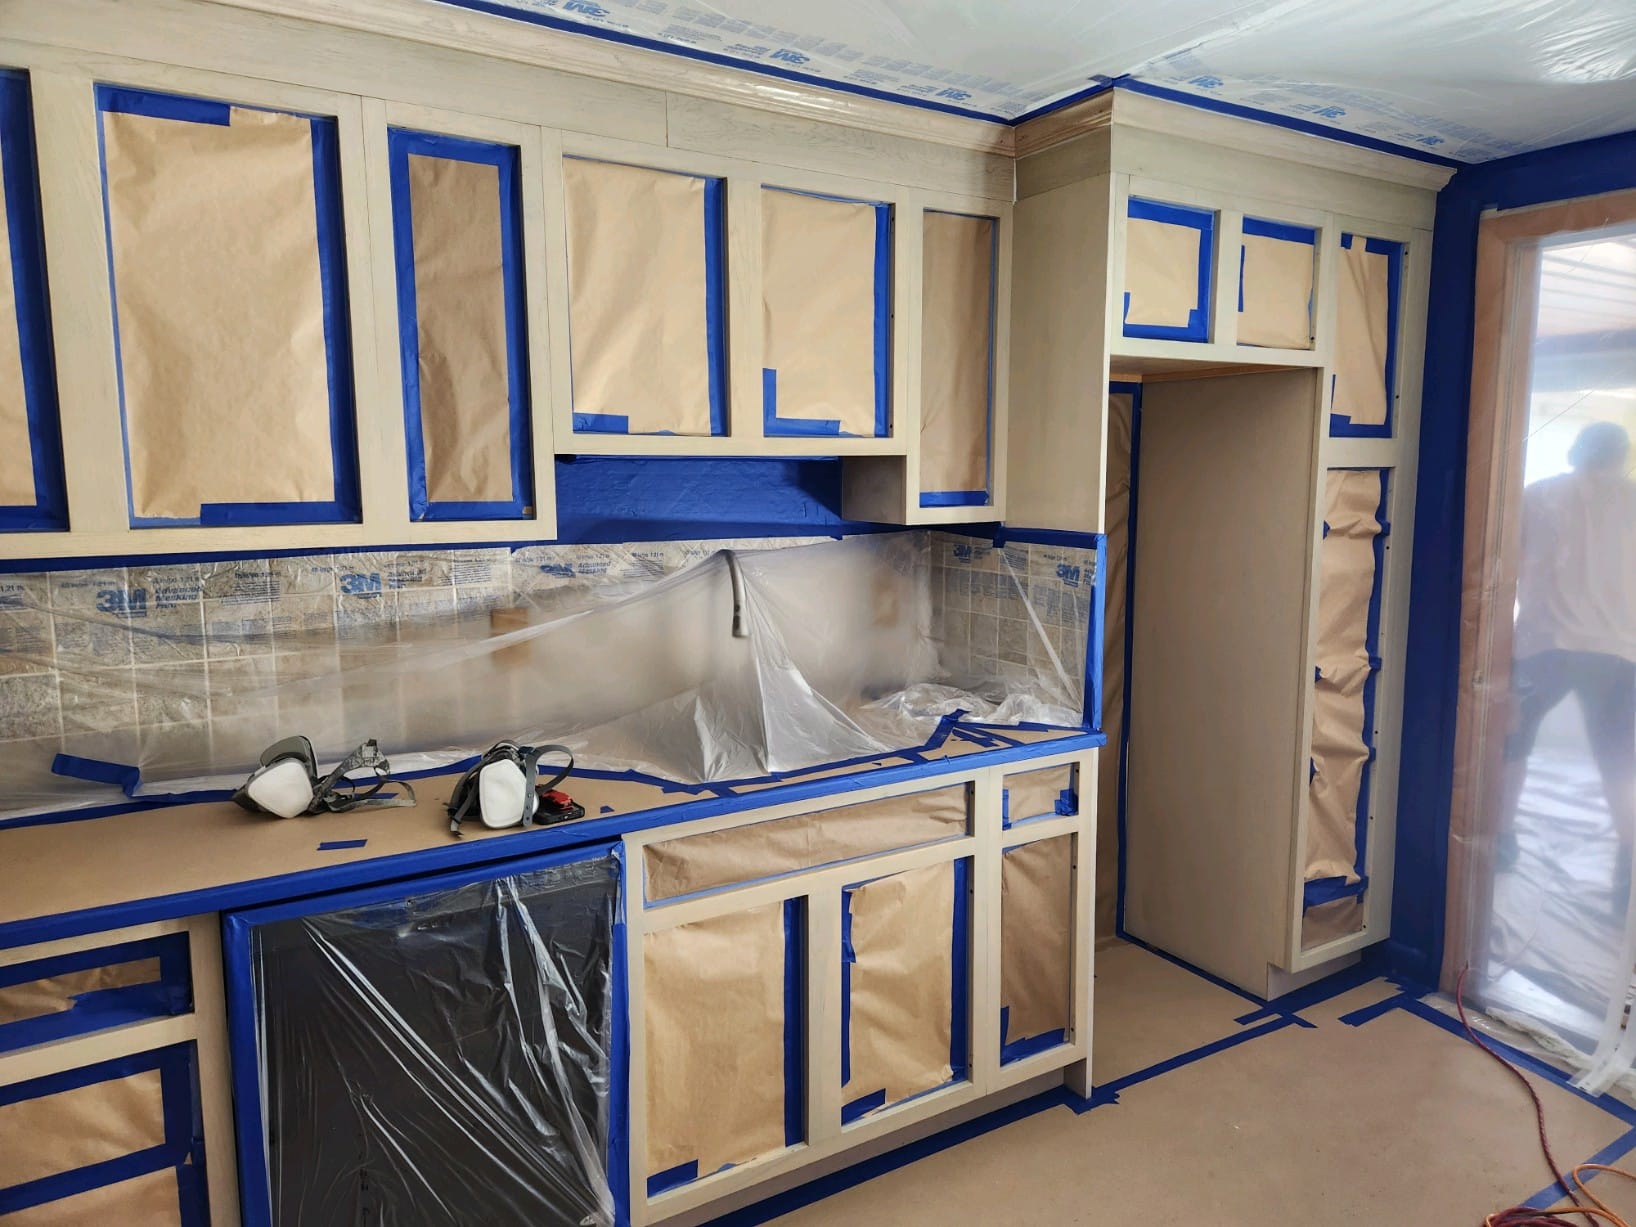 Home's kitchen cabinets being painted